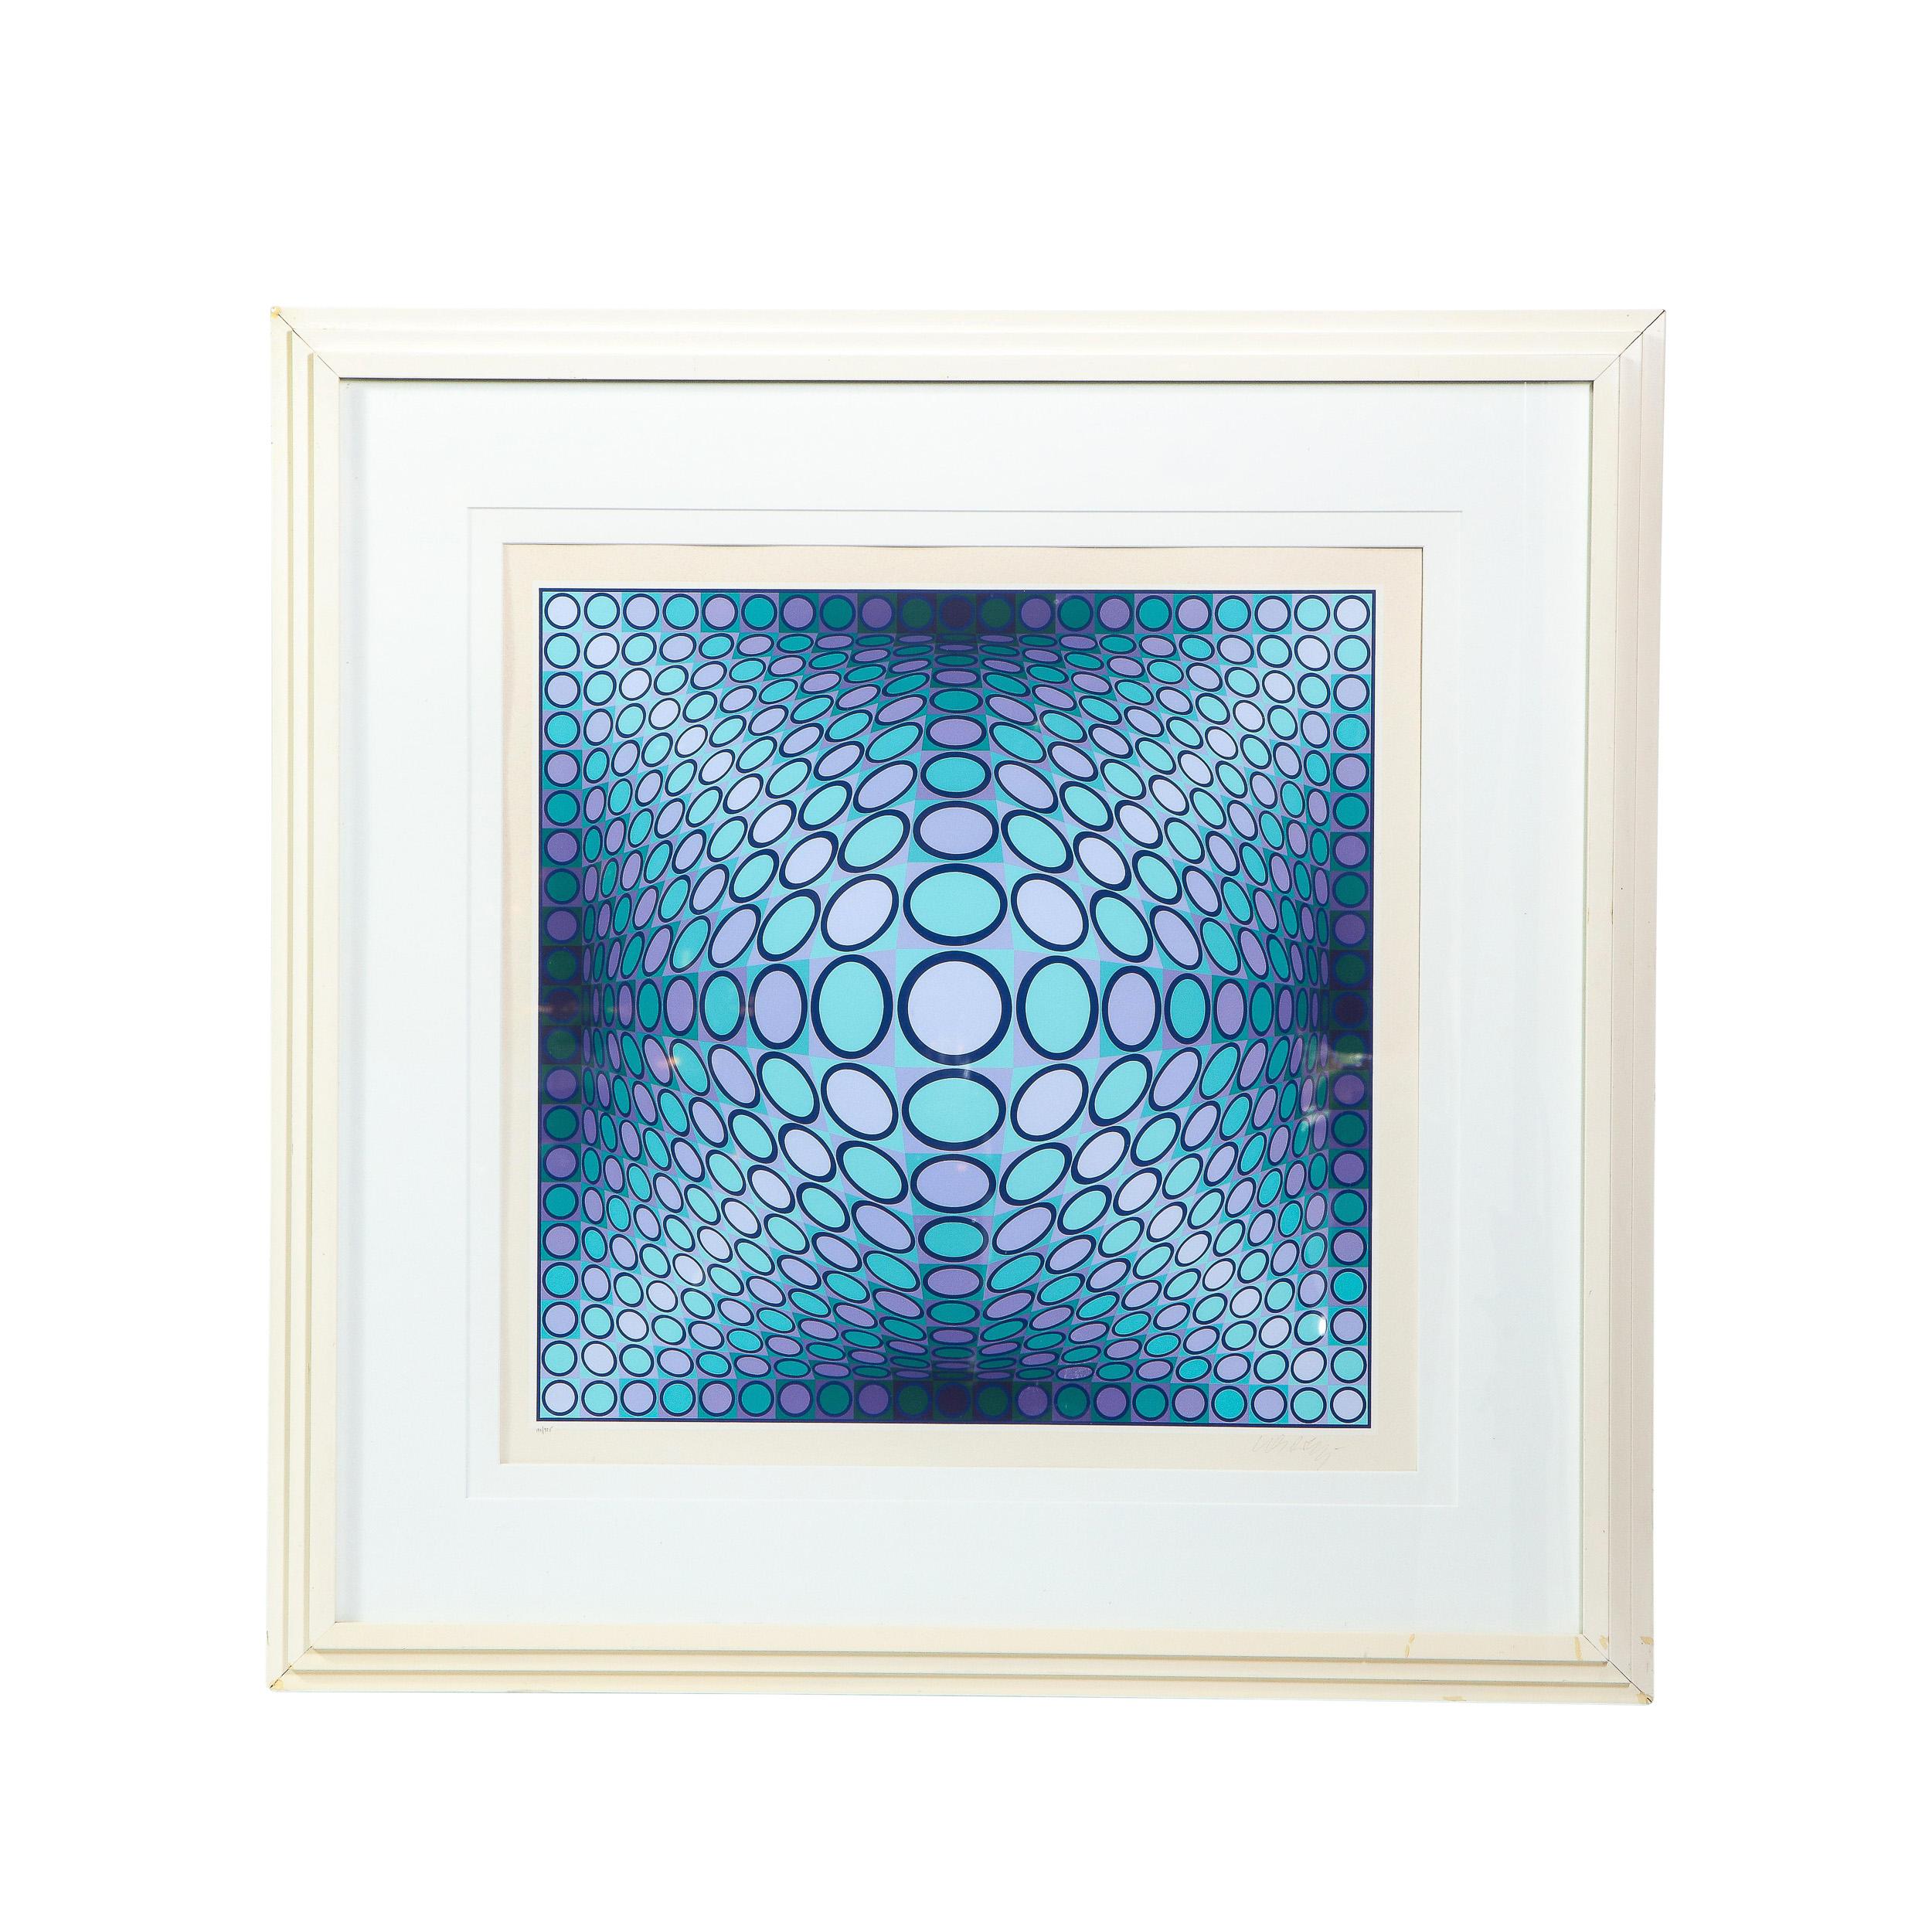 Untitled - Art by Victor Vasarely